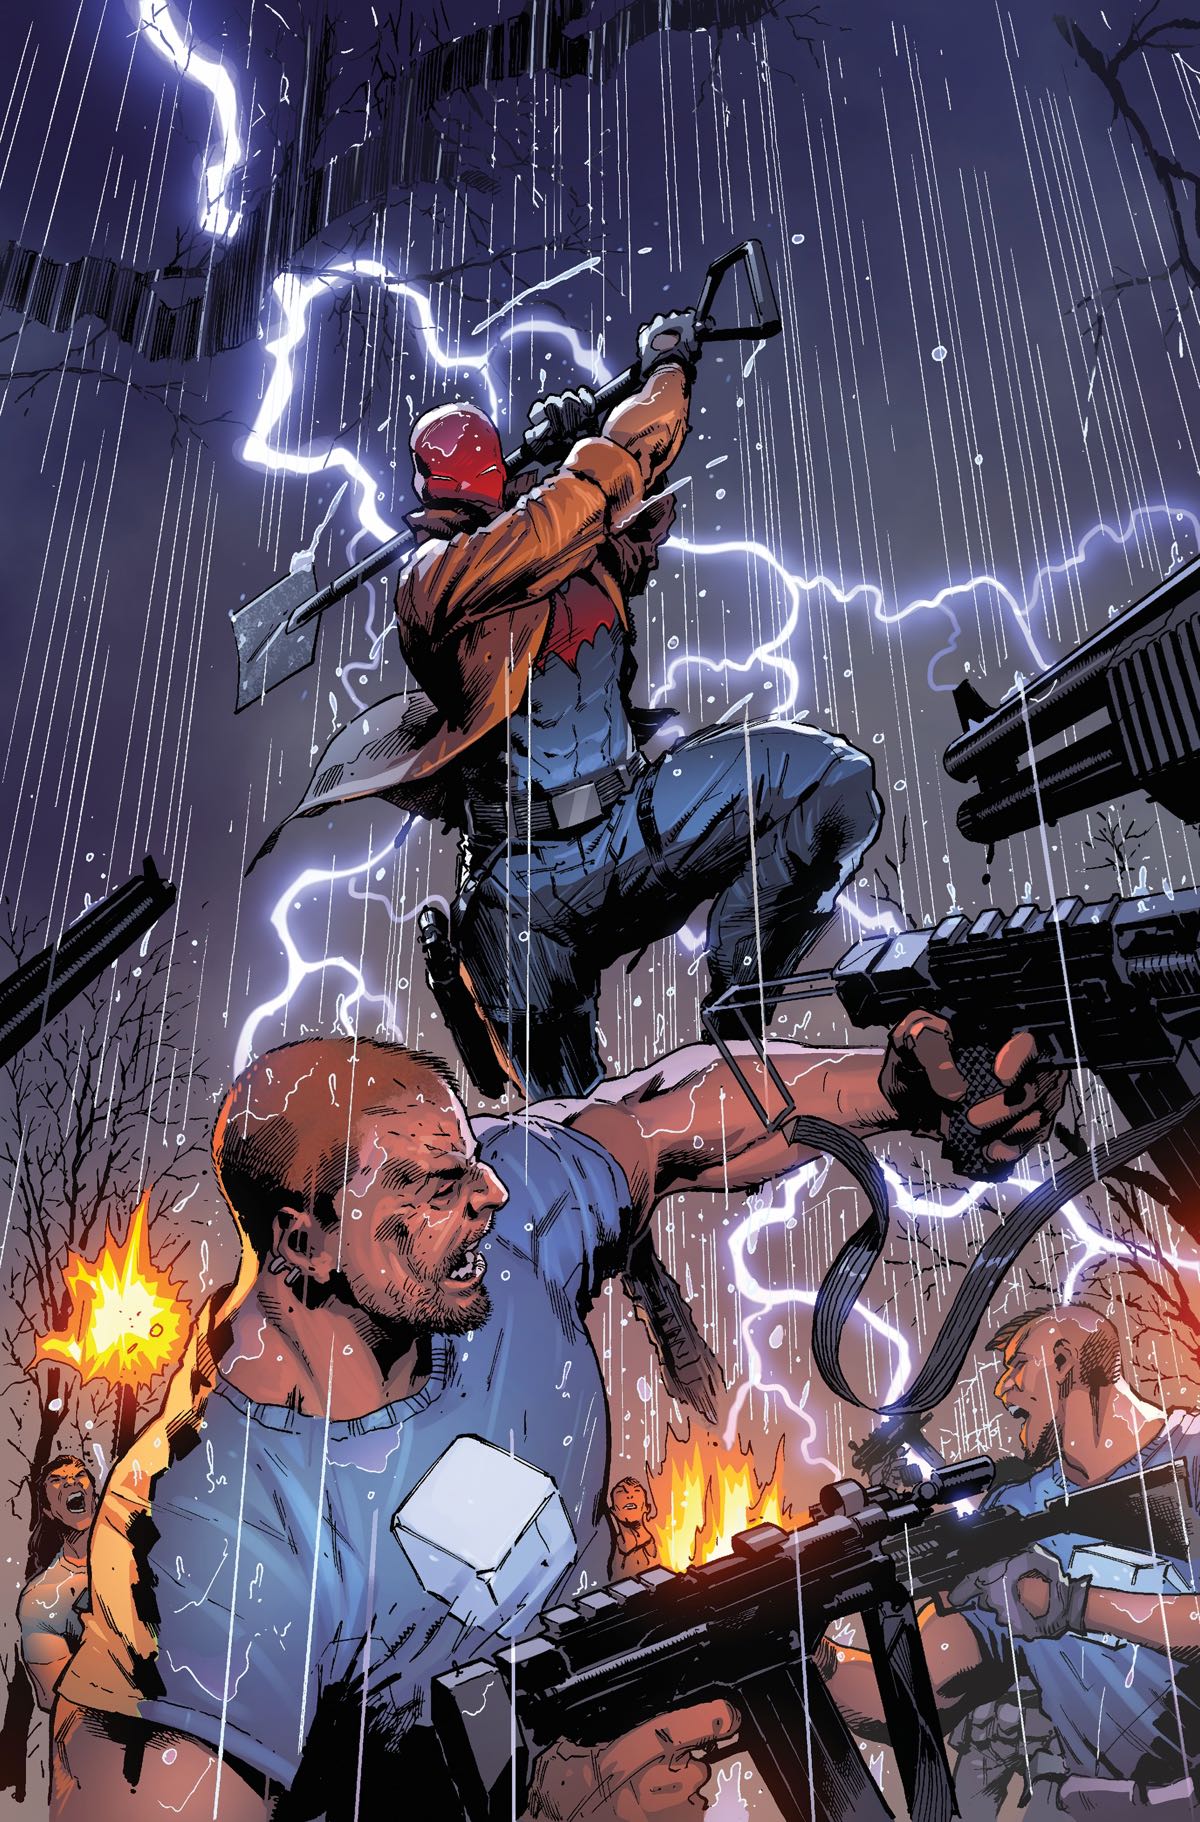 RED HOOD AND THE OUTLAWS #23